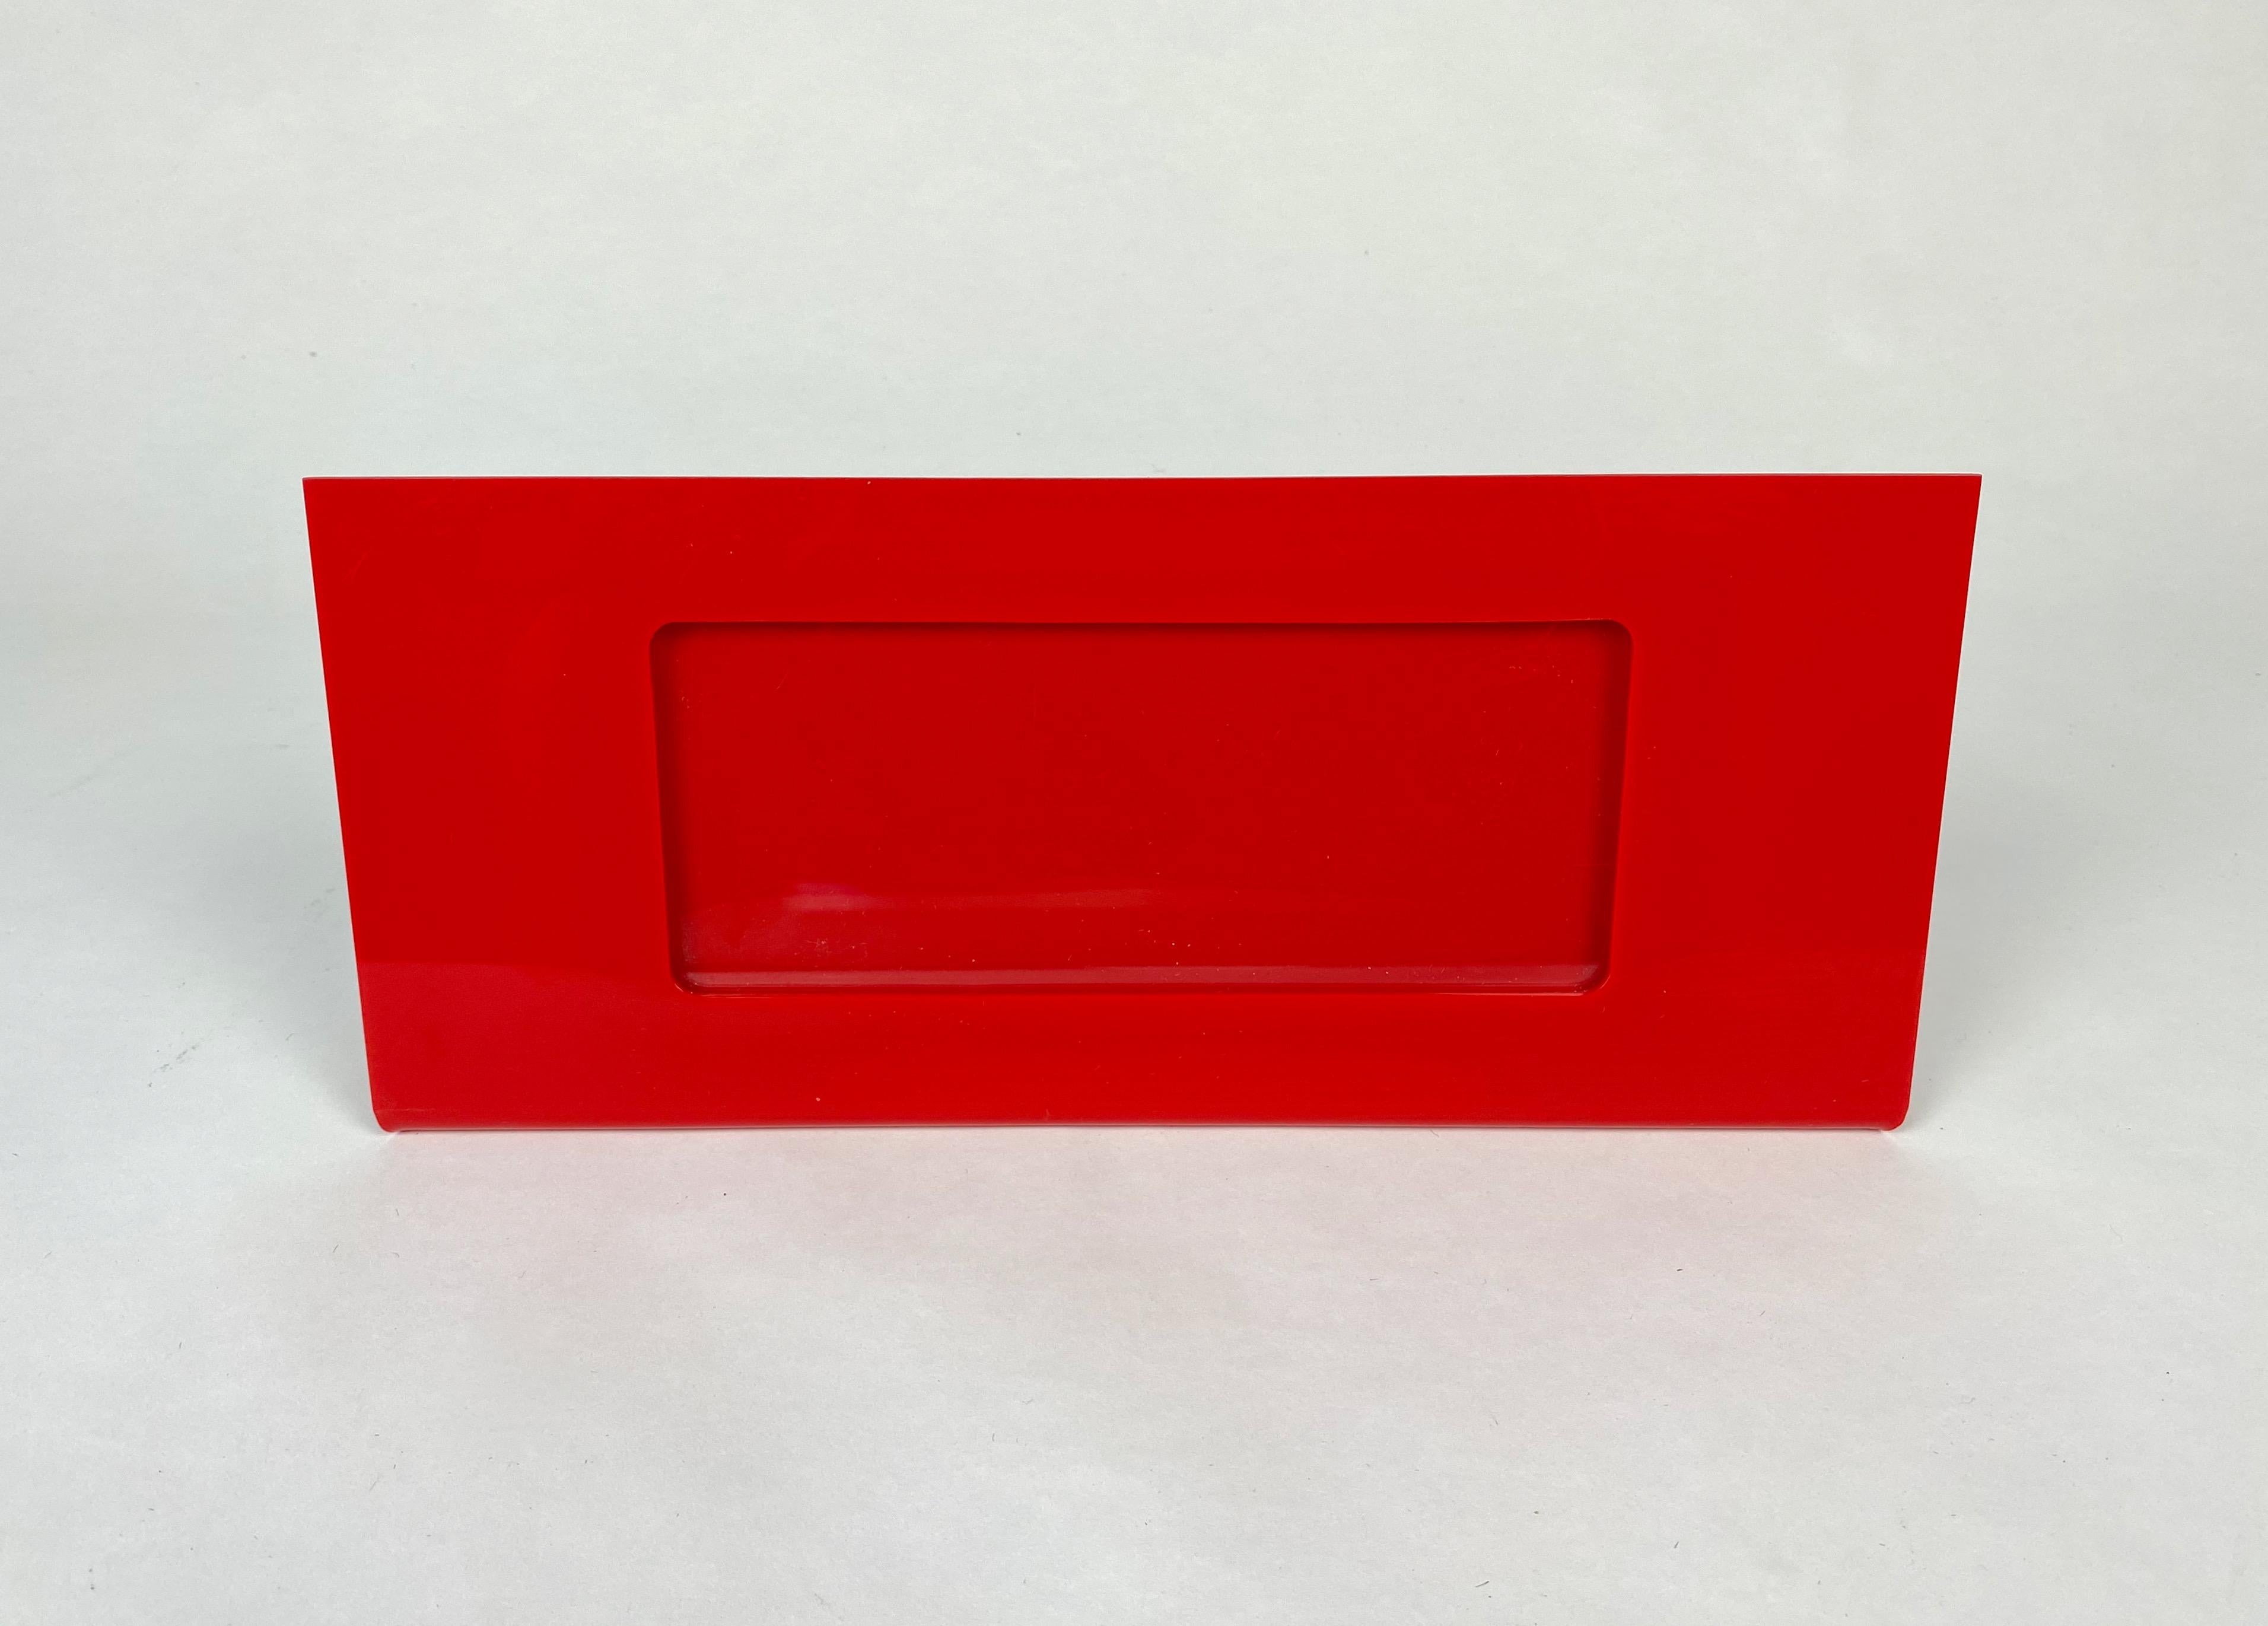 Rectangular red picture frame signed by the Italian designer Gabriella Crespi (original plate shown in photos) made of Lucite, 1970s.